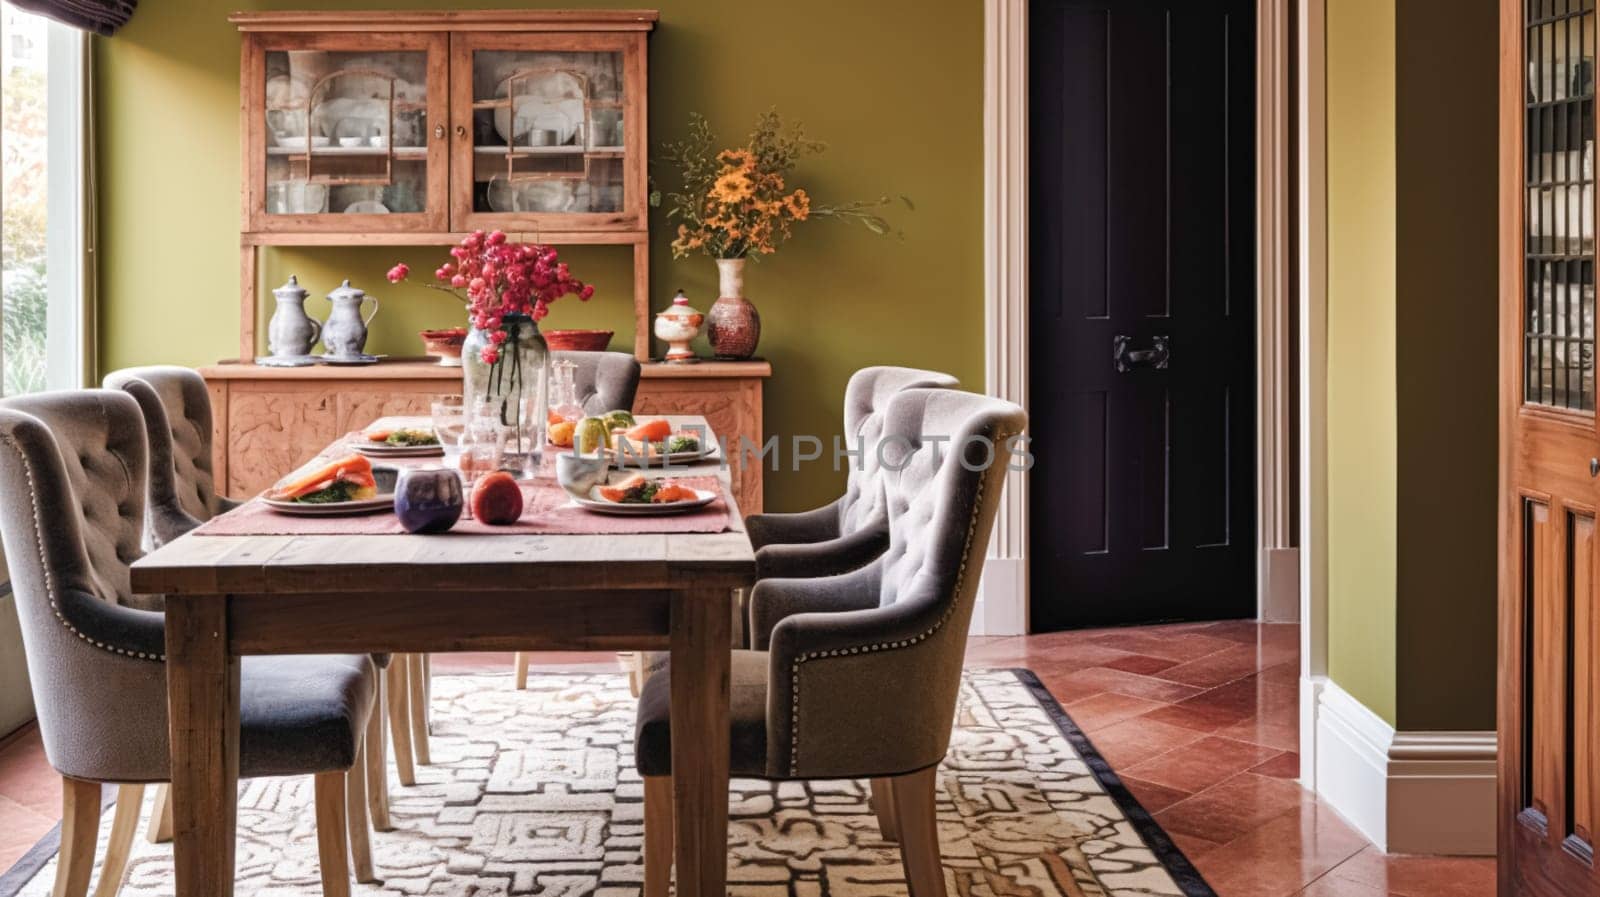 Elegant cottage dining room decor, interior design and country house furniture, home decor, table and chairs, English countryside style interiors